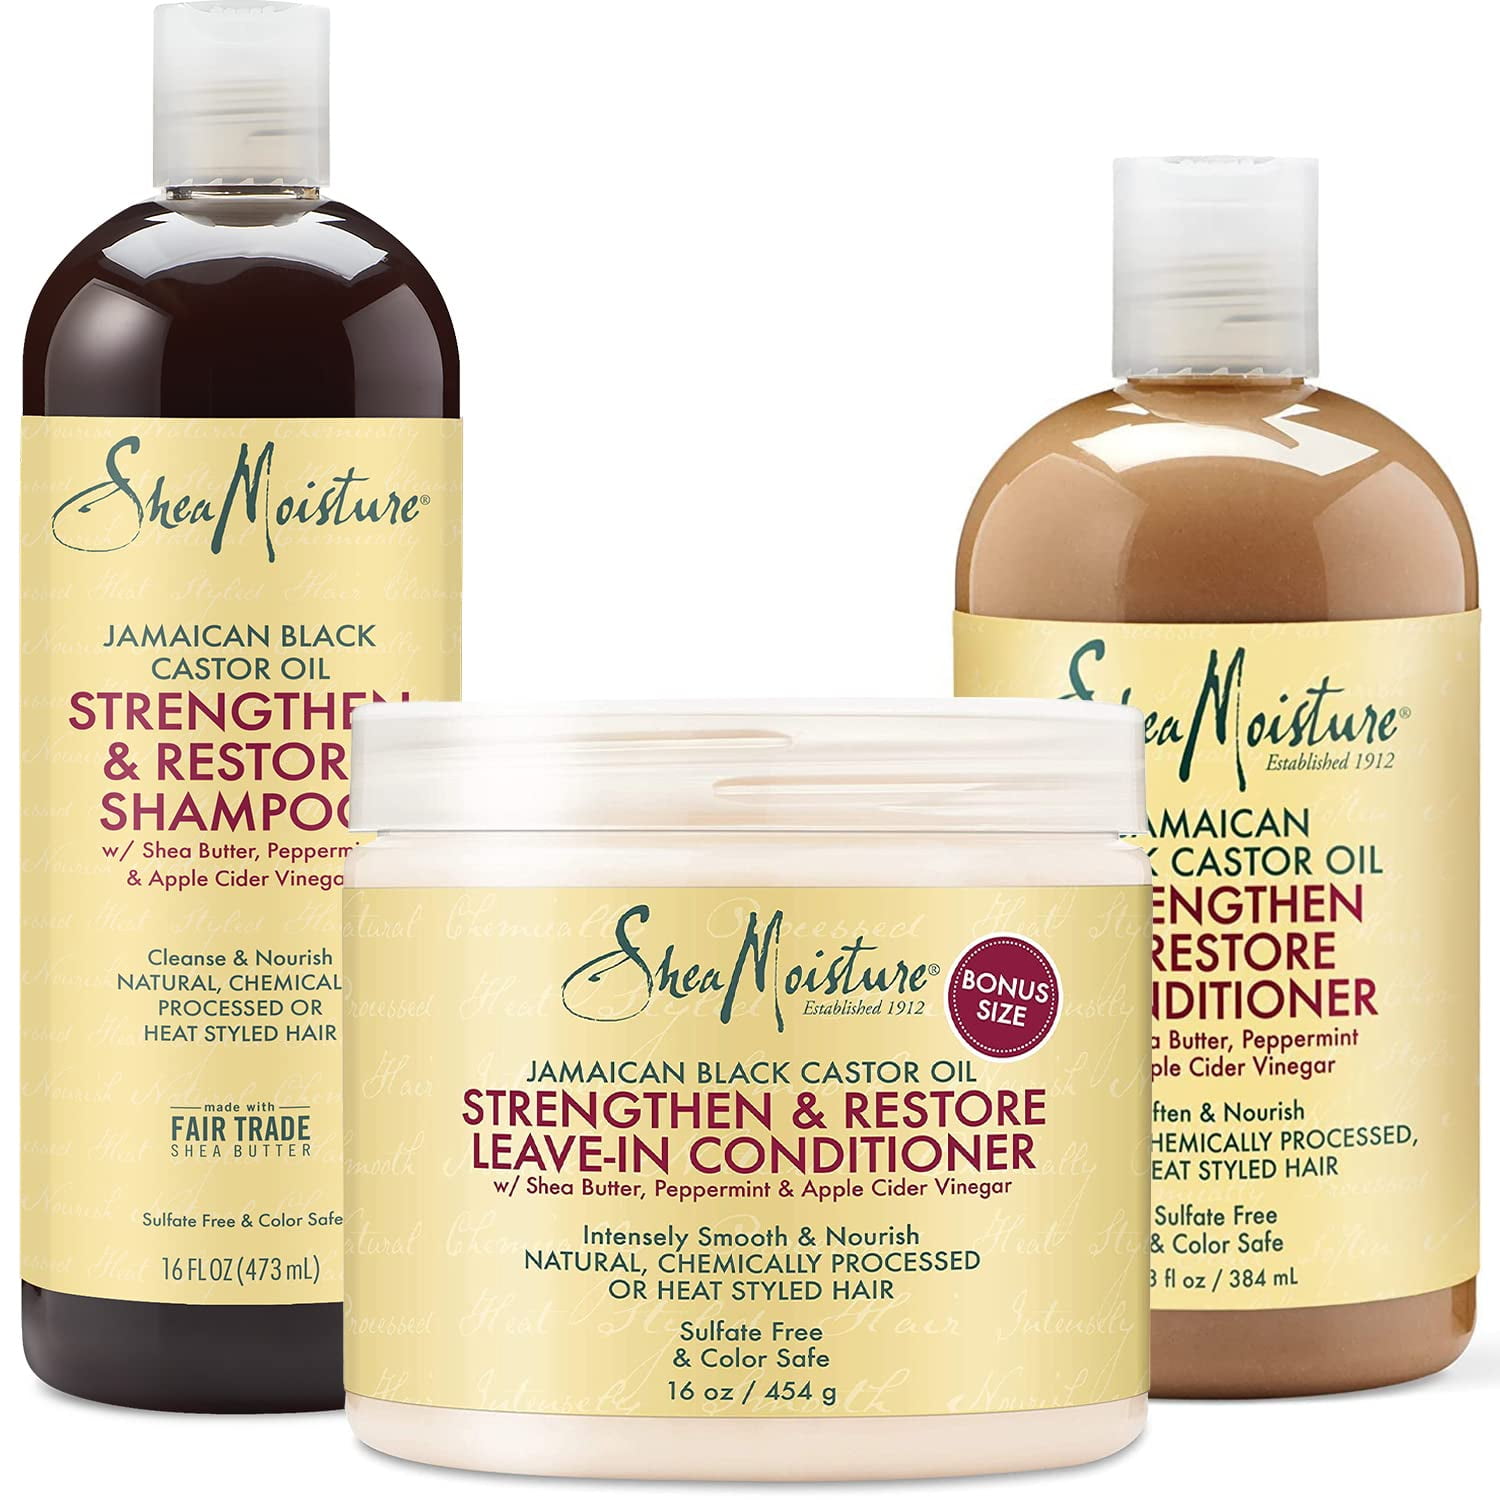 SheaMoisture Moisturizing Nourishing Daily Shampoo, Conditioner & Leave-in Conditioner Full Size Set with Shea Butter, Peppermint & Apple Vinegar - 3 - Walmart.com